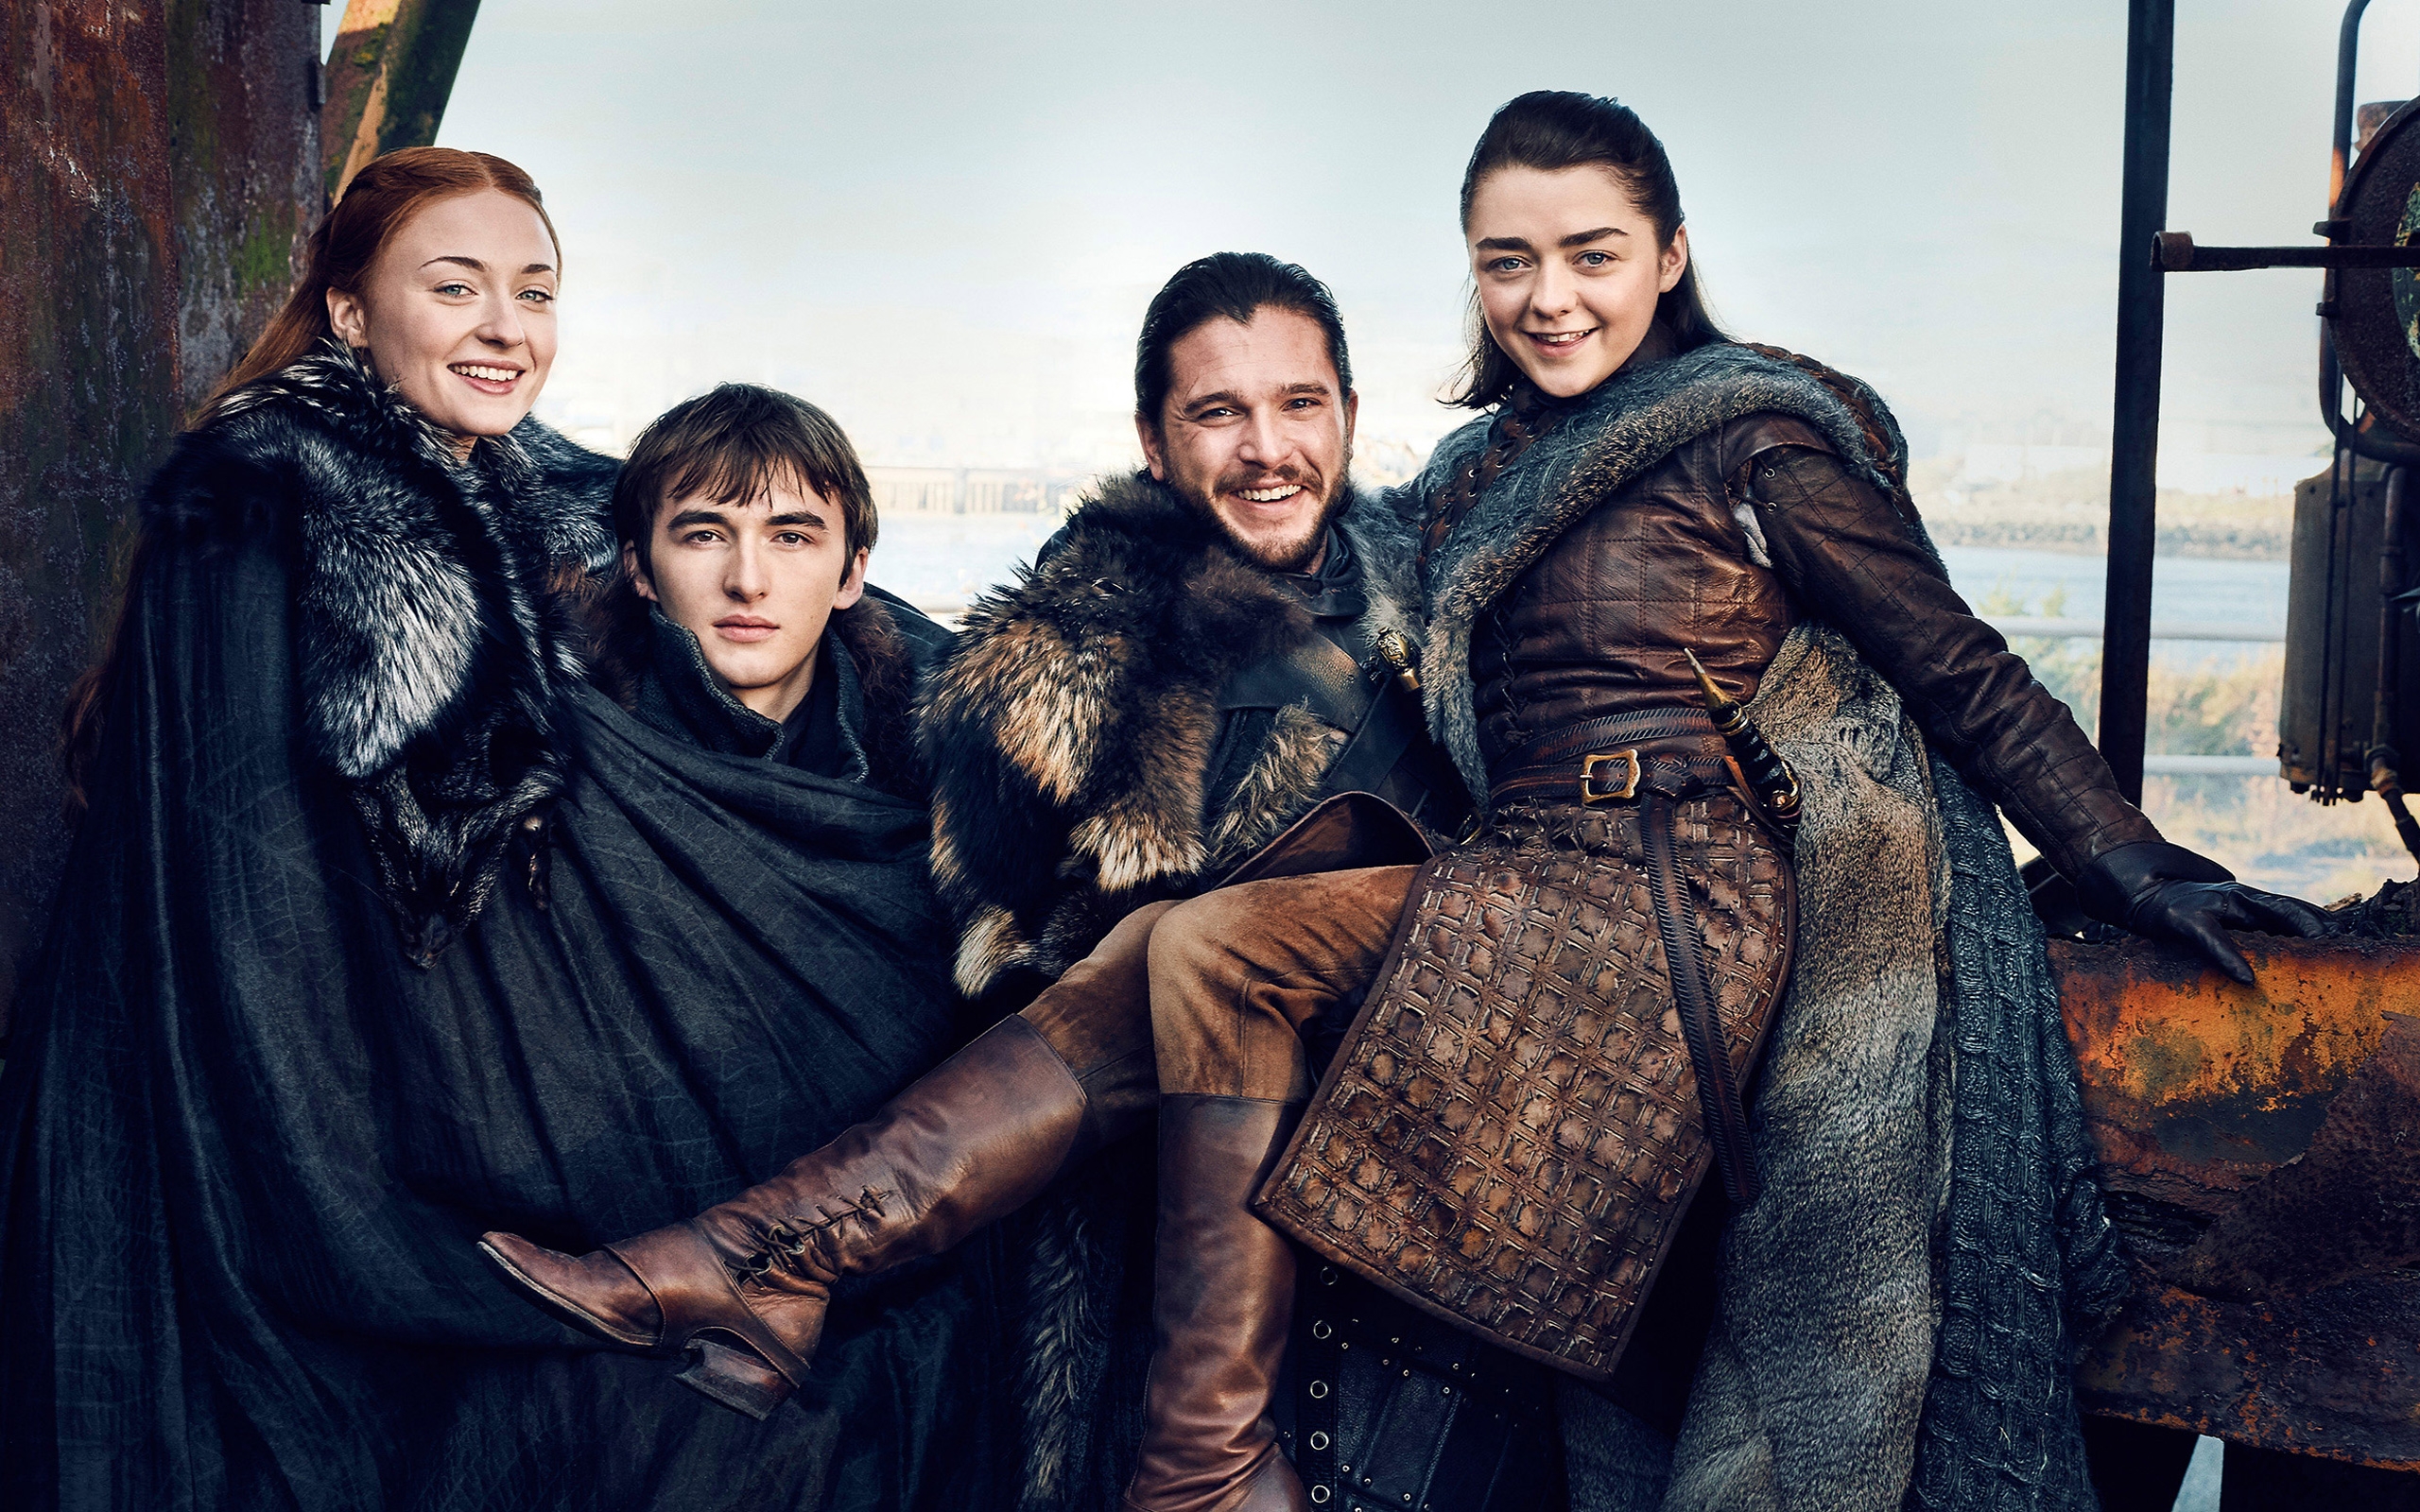 Wallpapers game of thrones 7 the stark family series on the desktop